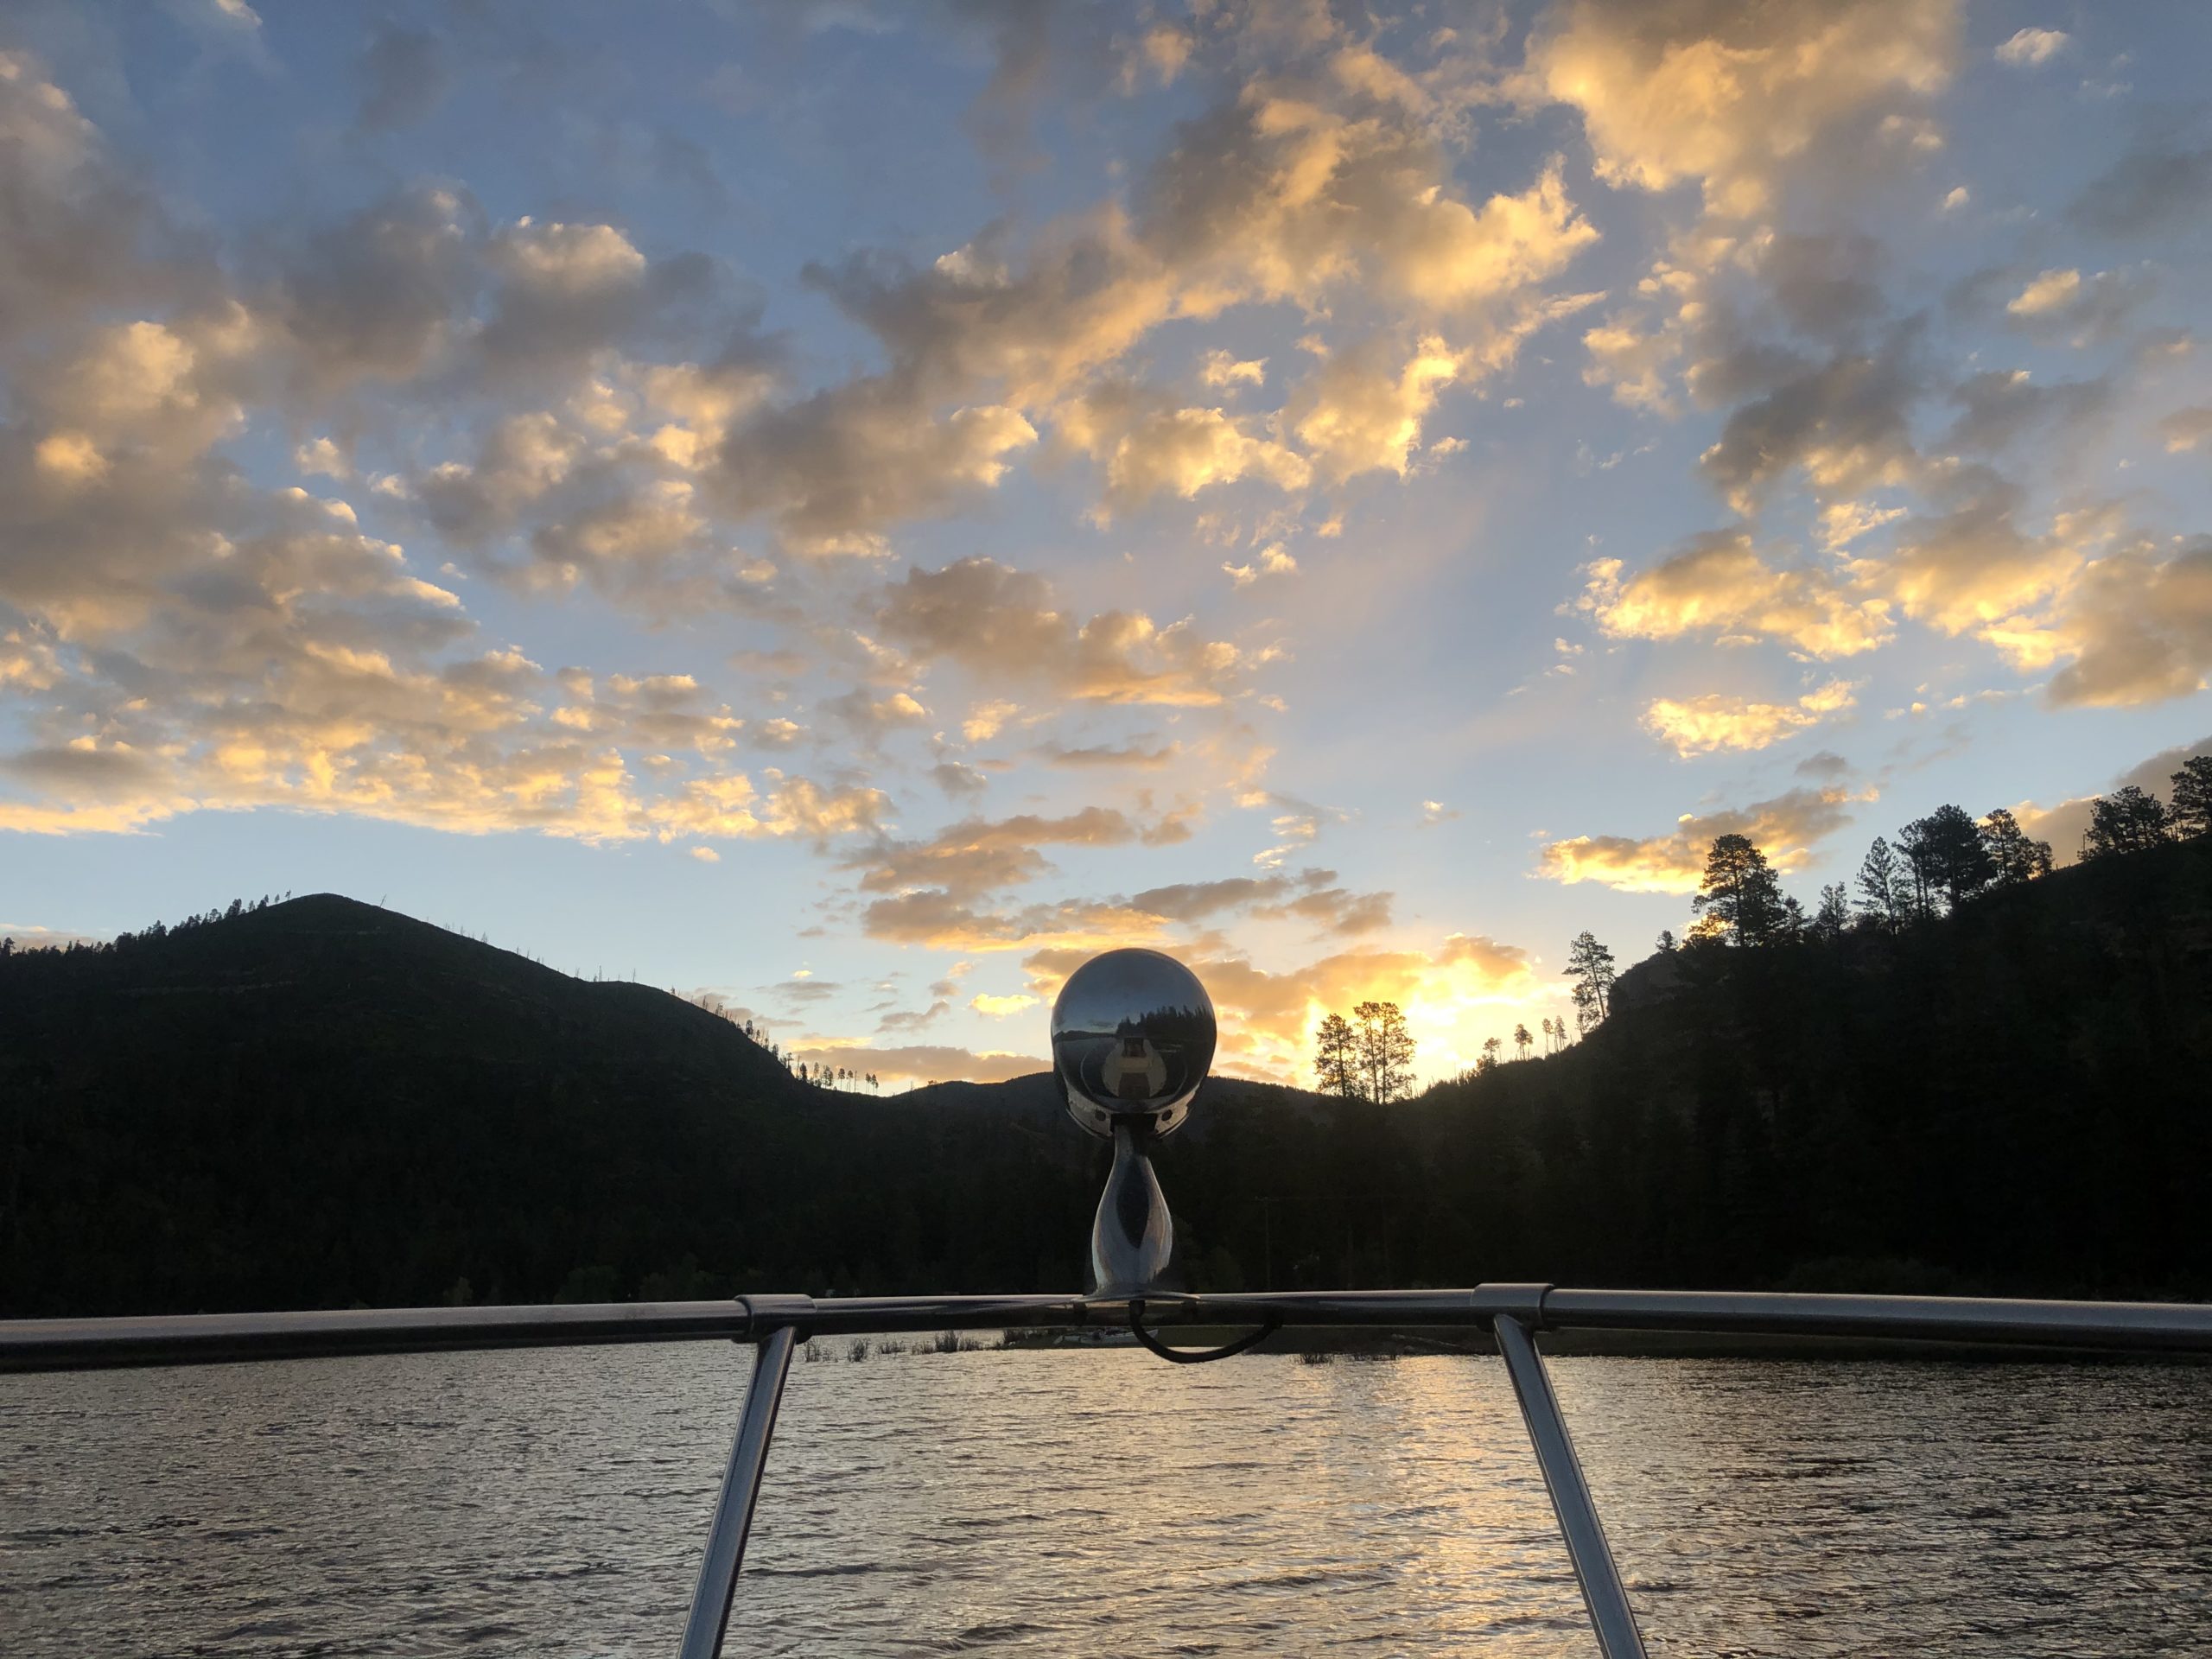 summer sunset on lake vallecito with charter vallecito boat tours 2